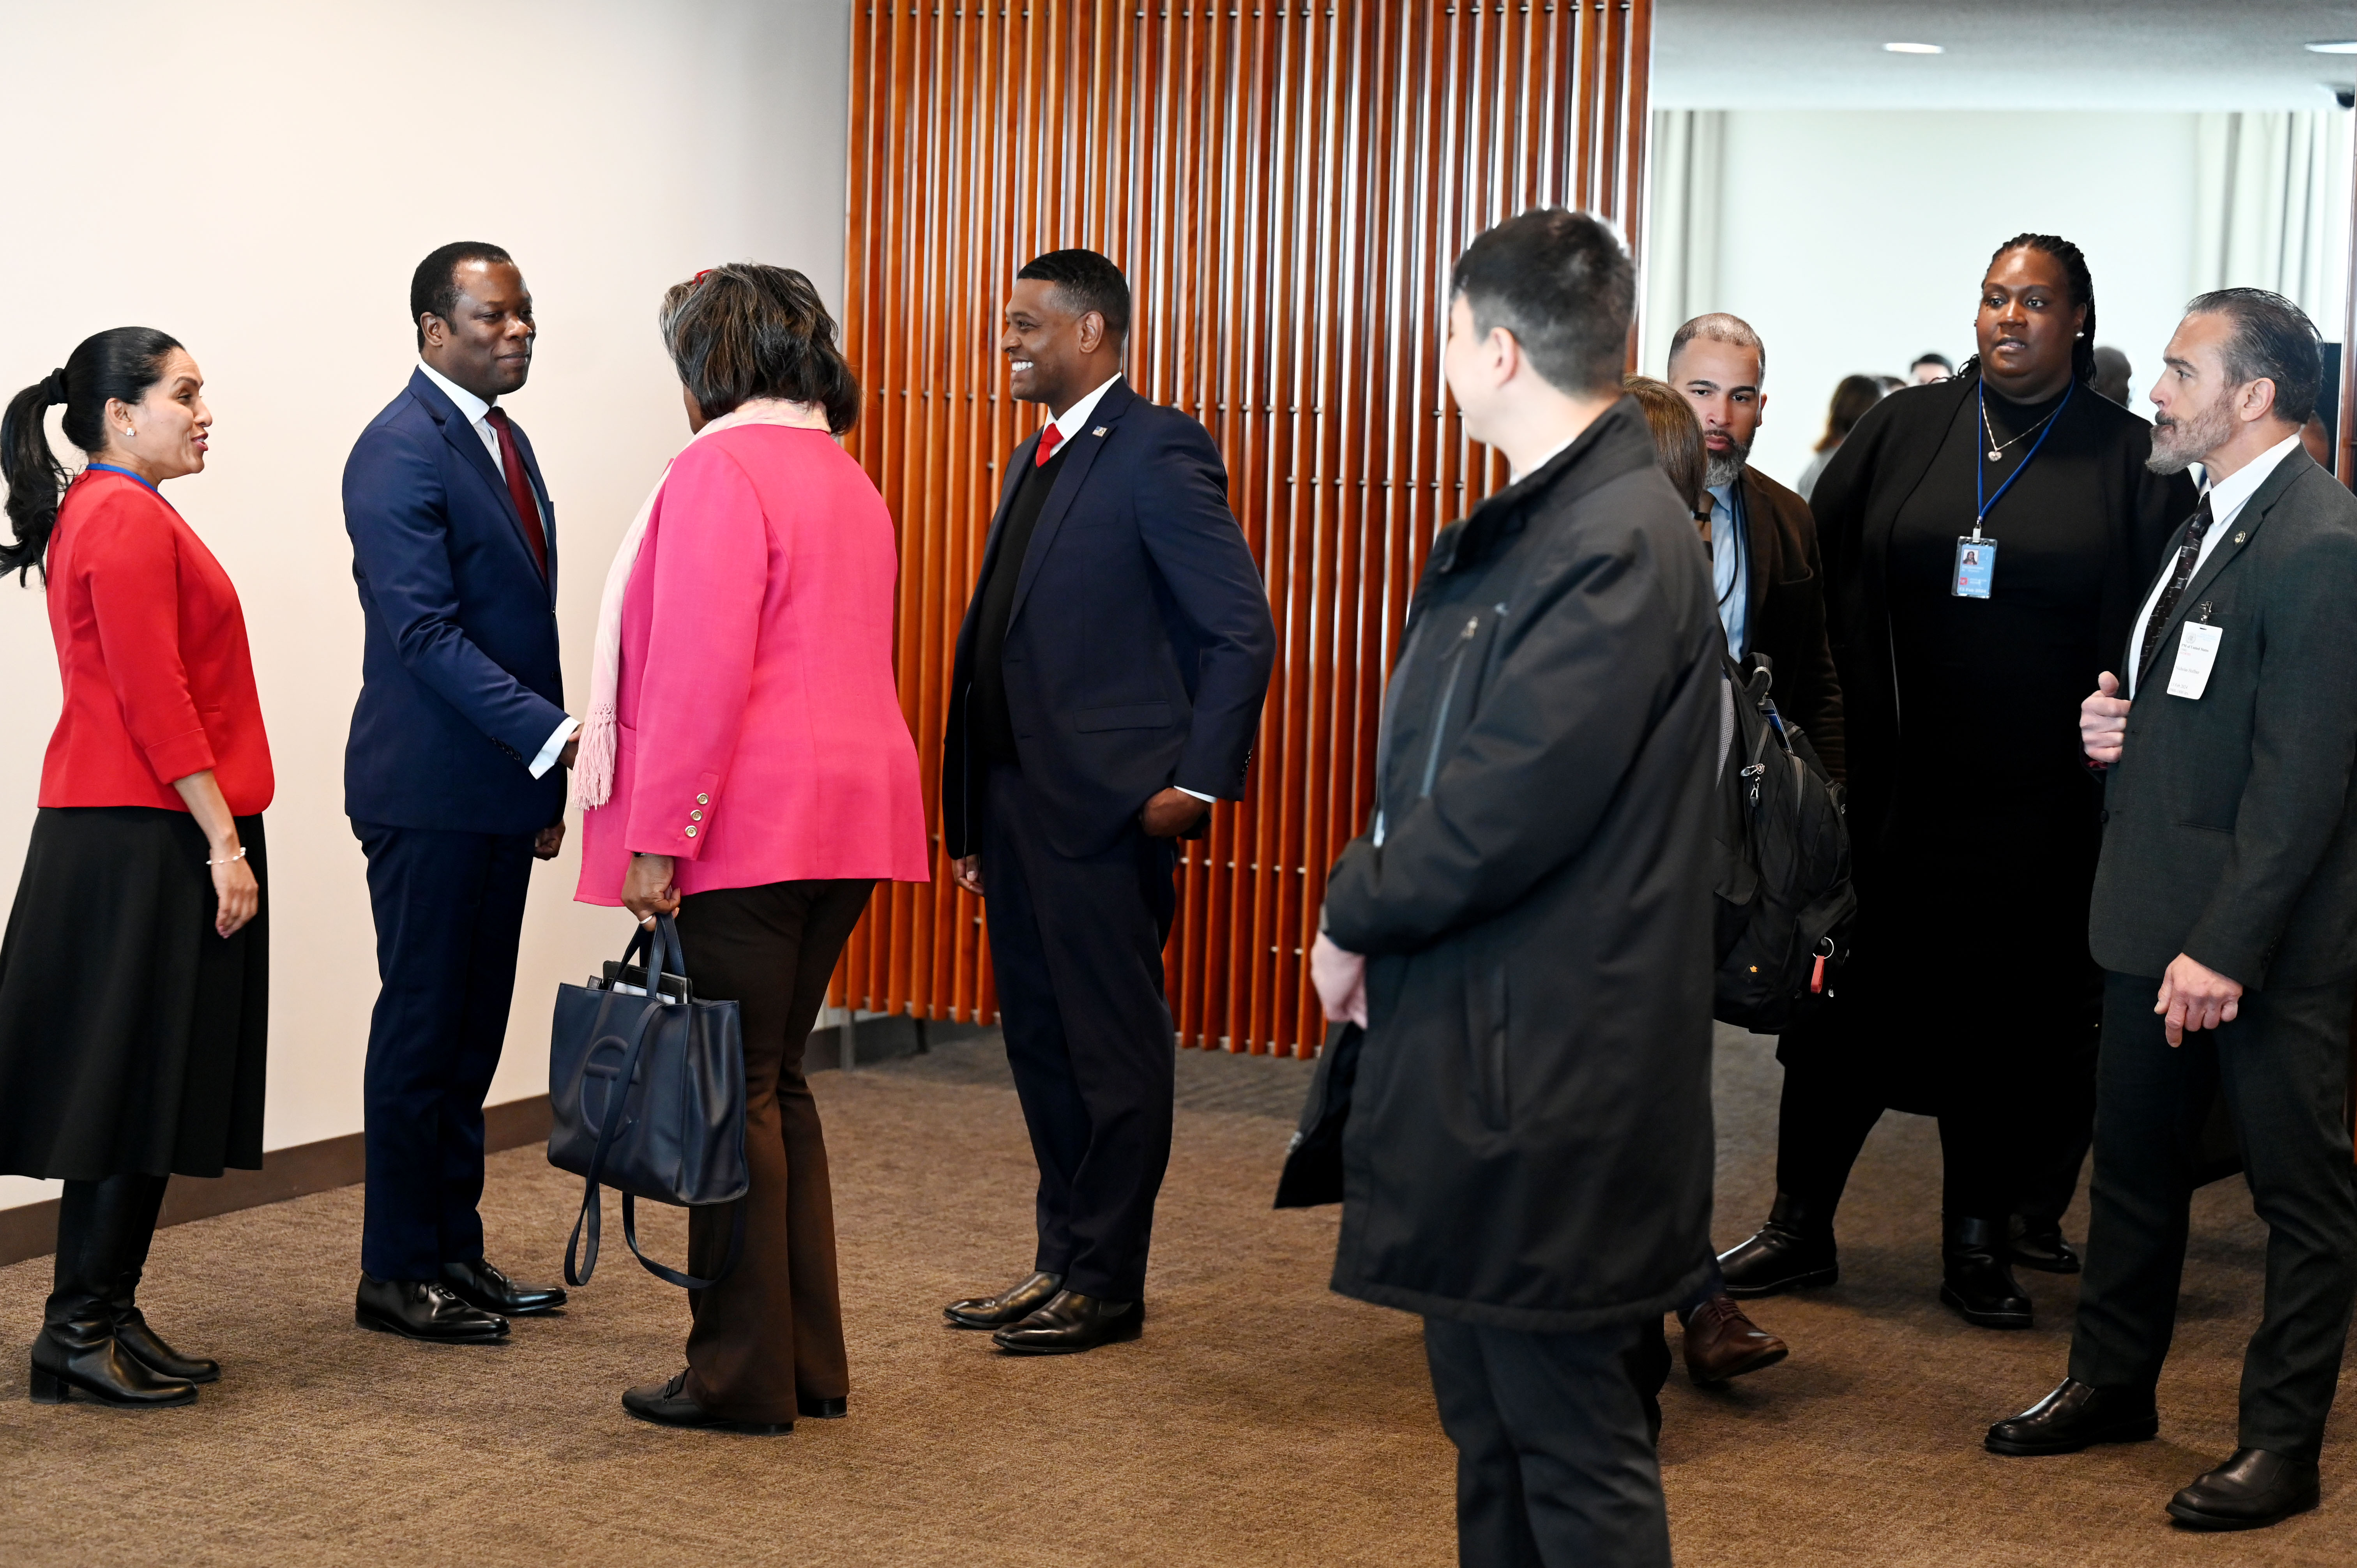 Scenes from lunch reception on the occasion of Guyana’s Presidency of the United Nations Security Council